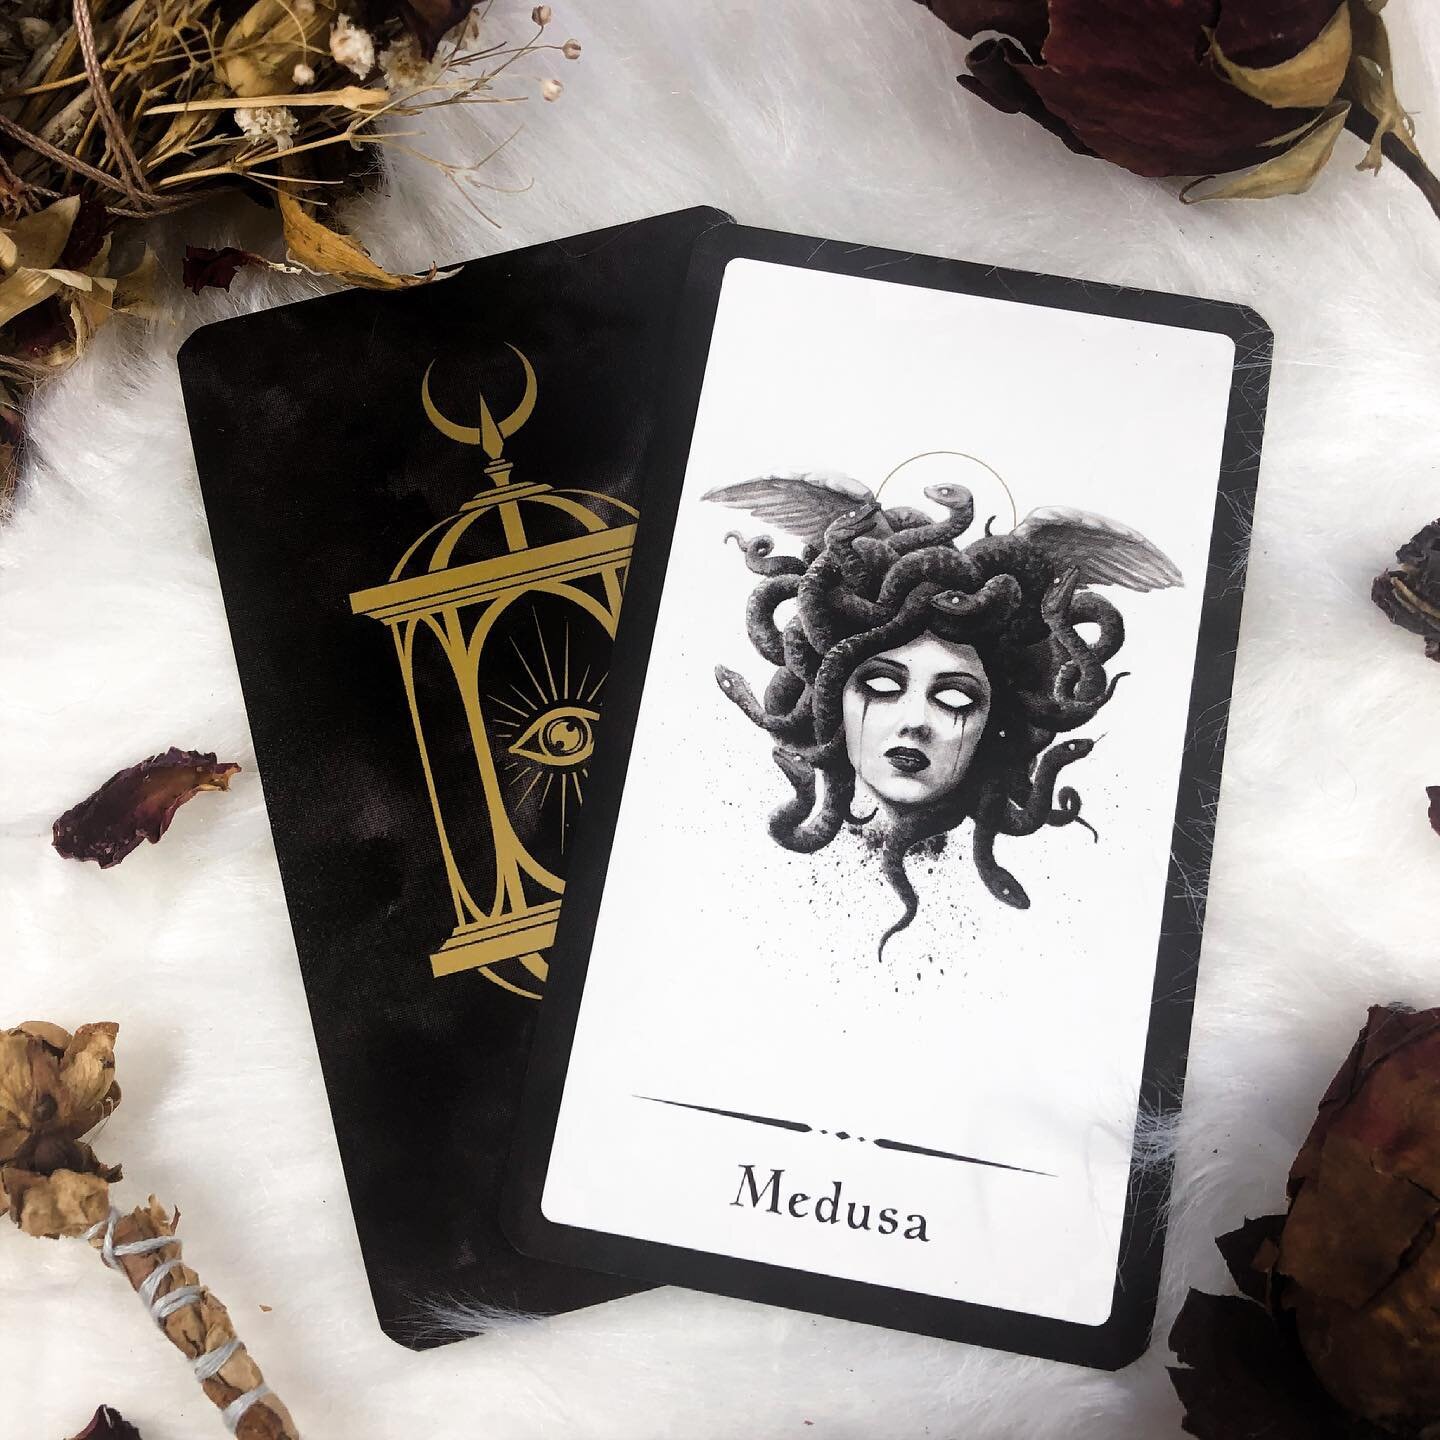 Tomorrow&hellip; 12 PM CST🌙 

The decks are launching. Are you ready? I&rsquo;m a bundle of happy nerves! 🍾 Medusa&rsquo;s staring at me like&hellip; chill lol.

The Witches of Legend oracle deck features 

-34 gilded cards 
- metallic ink embellis